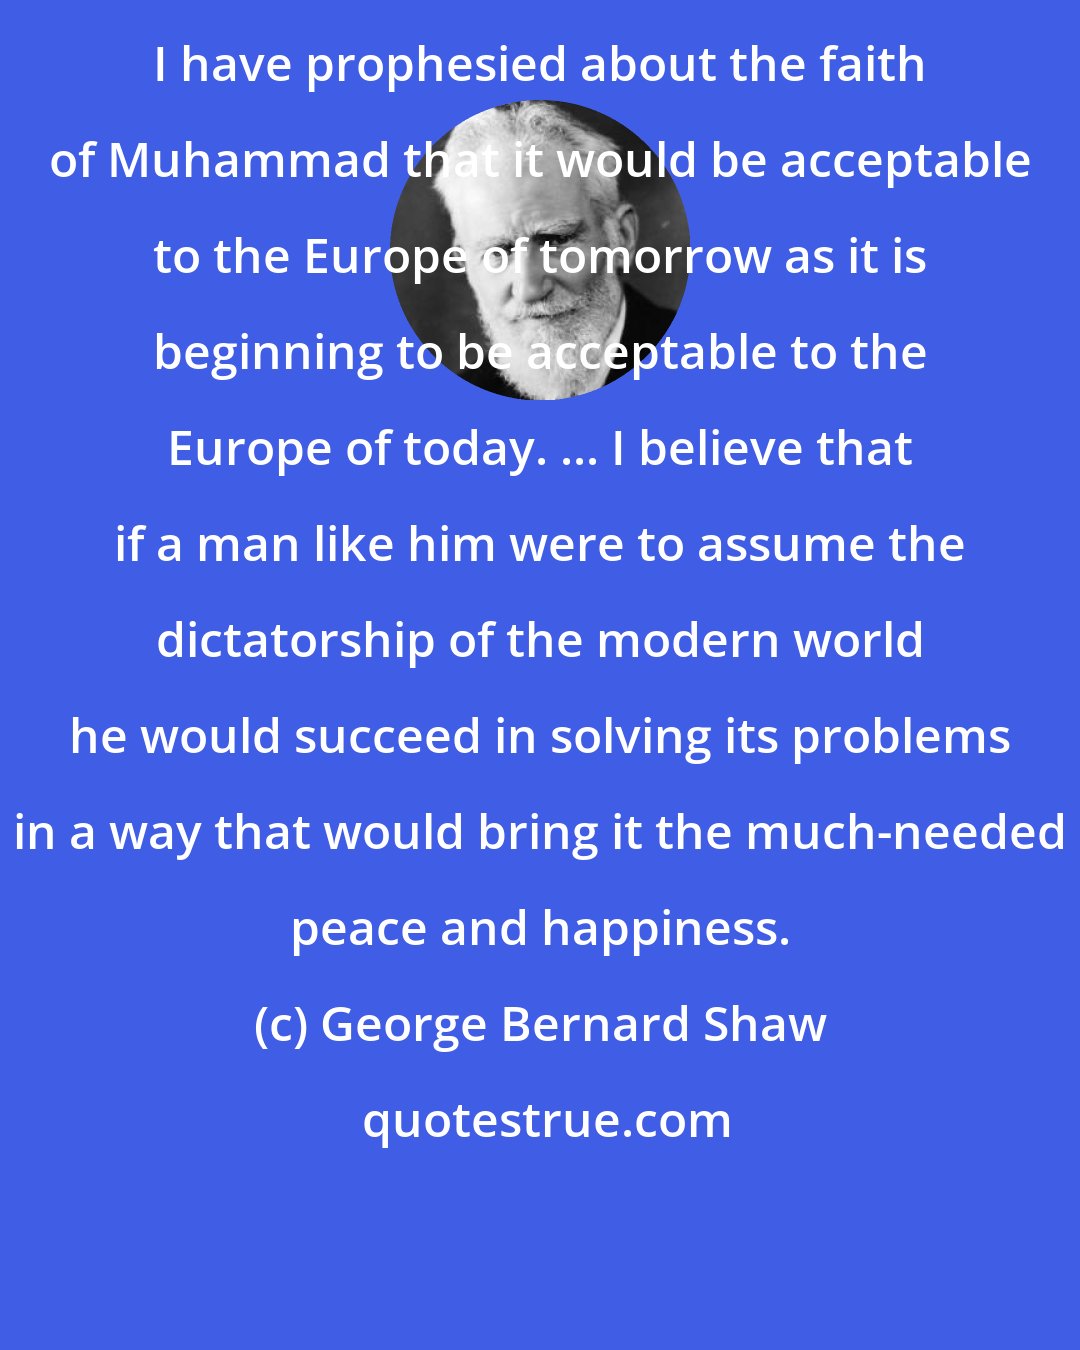 George Bernard Shaw: I have prophesied about the faith of Muhammad that it would be acceptable to the Europe of tomorrow as it is beginning to be acceptable to the Europe of today. ... I believe that if a man like him were to assume the dictatorship of the modern world he would succeed in solving its problems in a way that would bring it the much-needed peace and happiness.